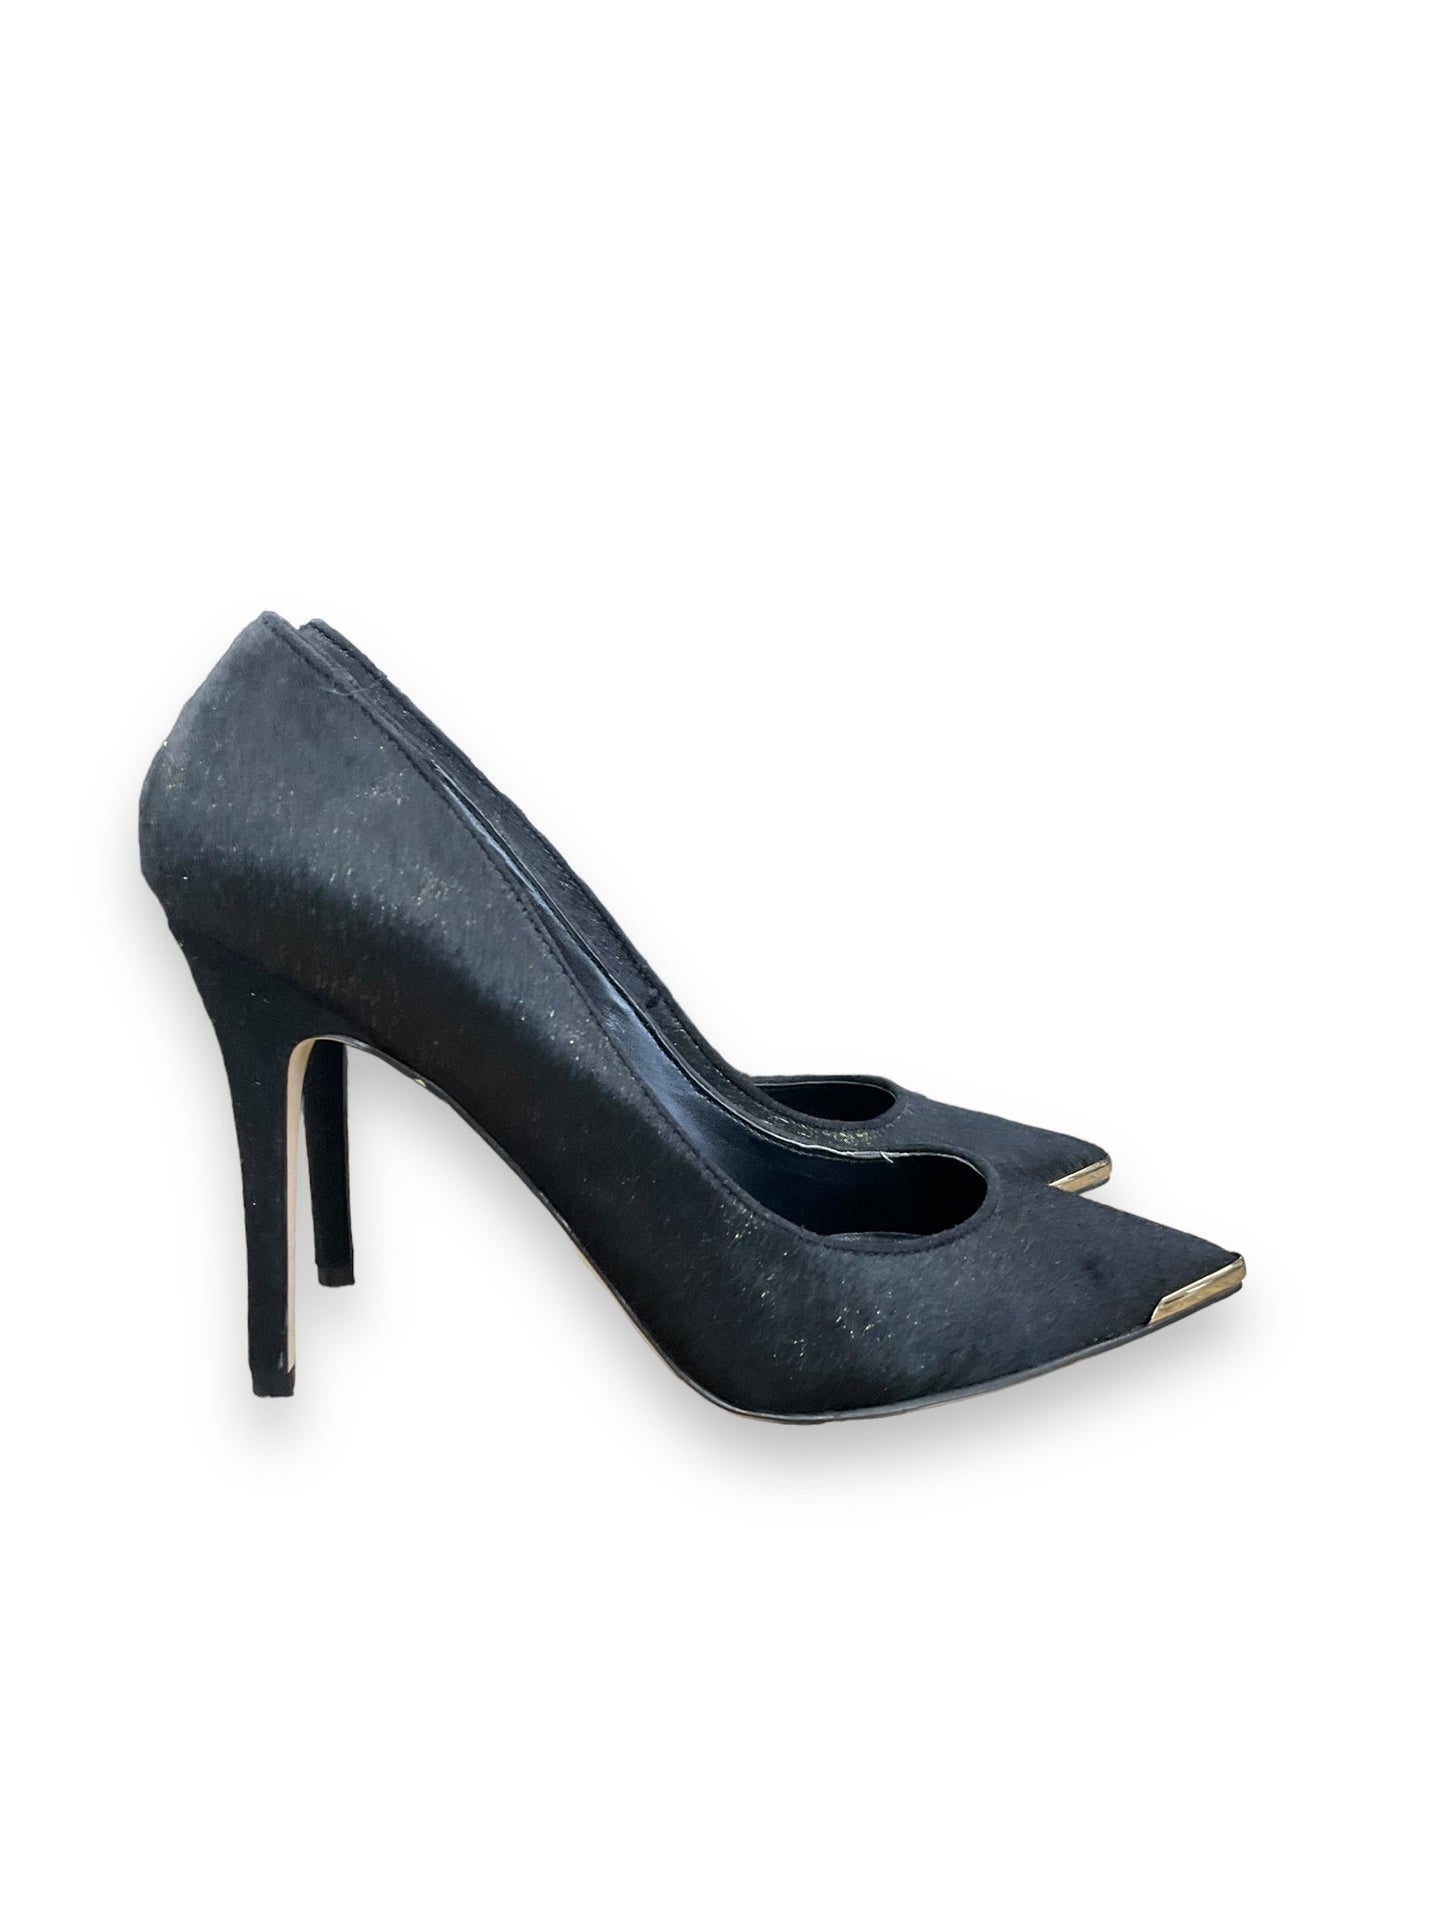 Shoes Heels Stiletto By Cmc  Size: 10